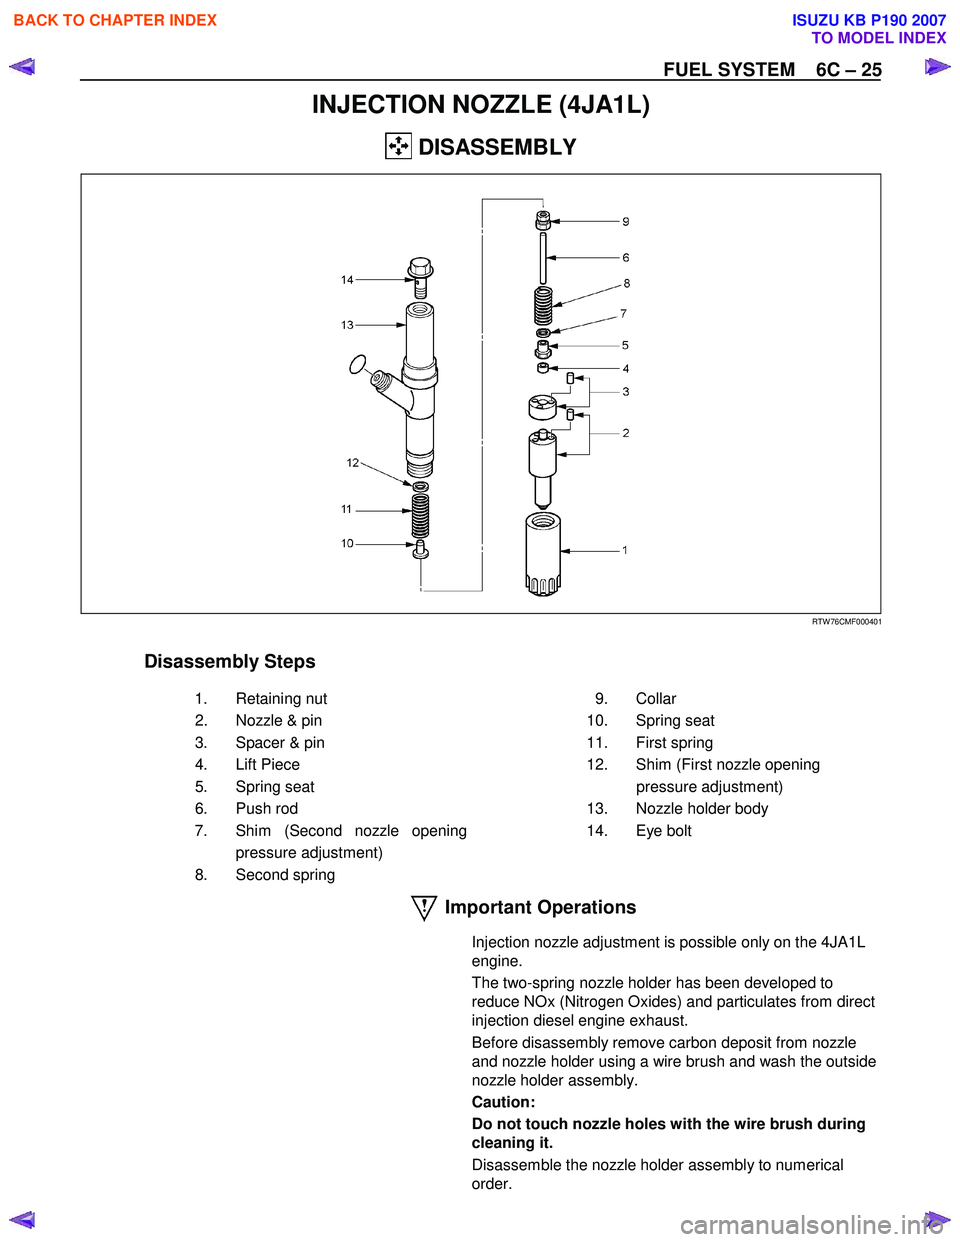 ISUZU KB P190 2007  Workshop Repair Manual FUEL SYSTEM    6C – 25 
INJECTION NOZZLE (4JA1L) 
 DISASSEMBLY 
 
 RTW 76CMF000401 
  
Disassembly Steps   
   1. Retaining nut    2.  Nozzle & pin  
  3.  Spacer & pin 
 4. Lift Piece 
 5. Spring s